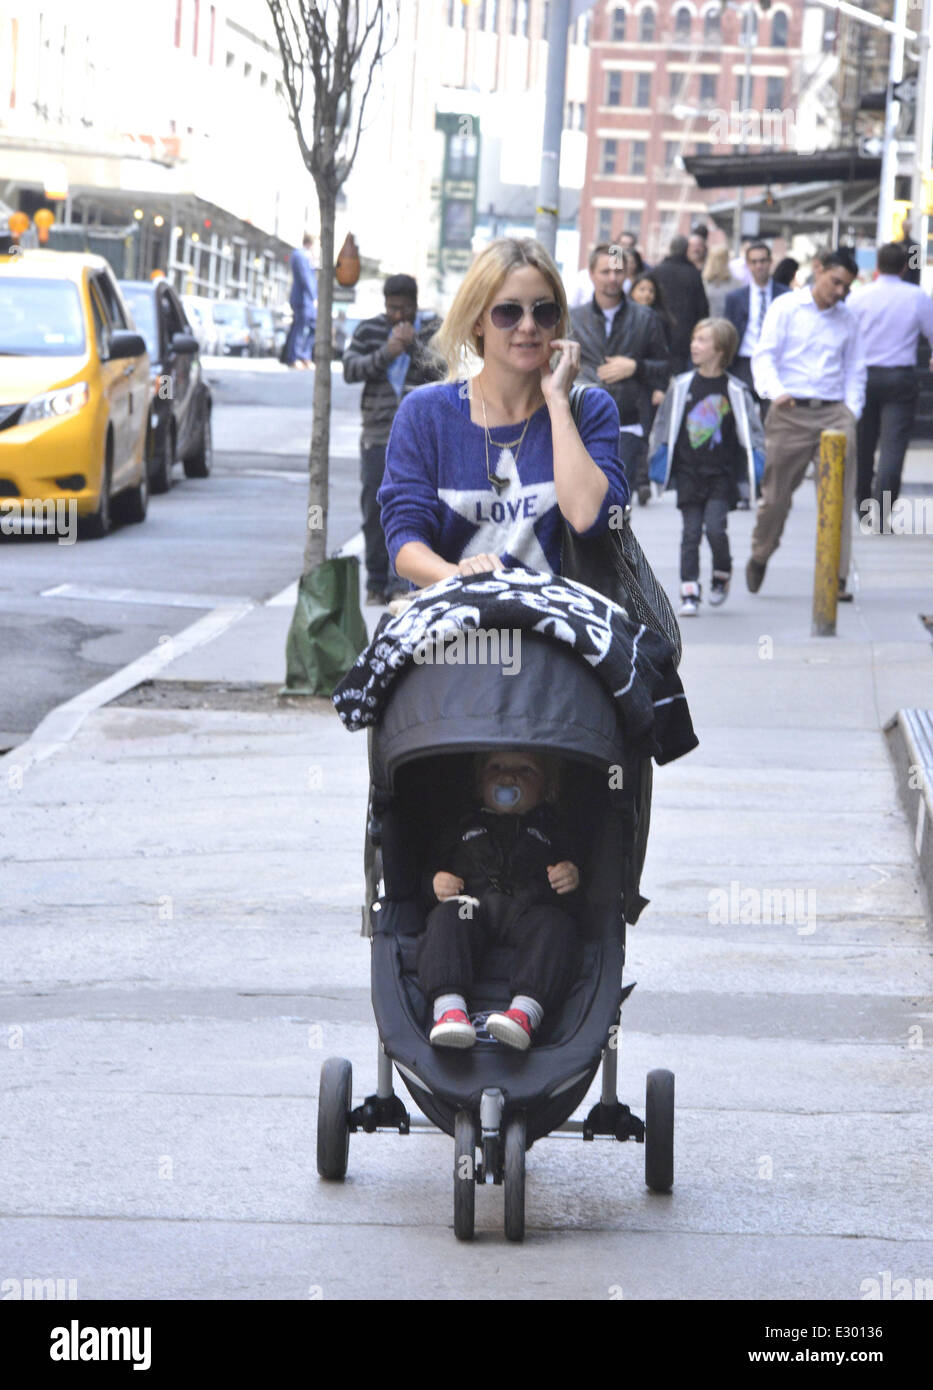 Kate Hudson takes her son Bingham Hawn Bellamy out in a stroller and head for lunch with family at Bubby's restaurant in Manhattan  Featuring: Kate Hudson,Bingham Bellamy Where: New York City, NY, United States When: 17 Apr 2013ENN.com Stock Photo